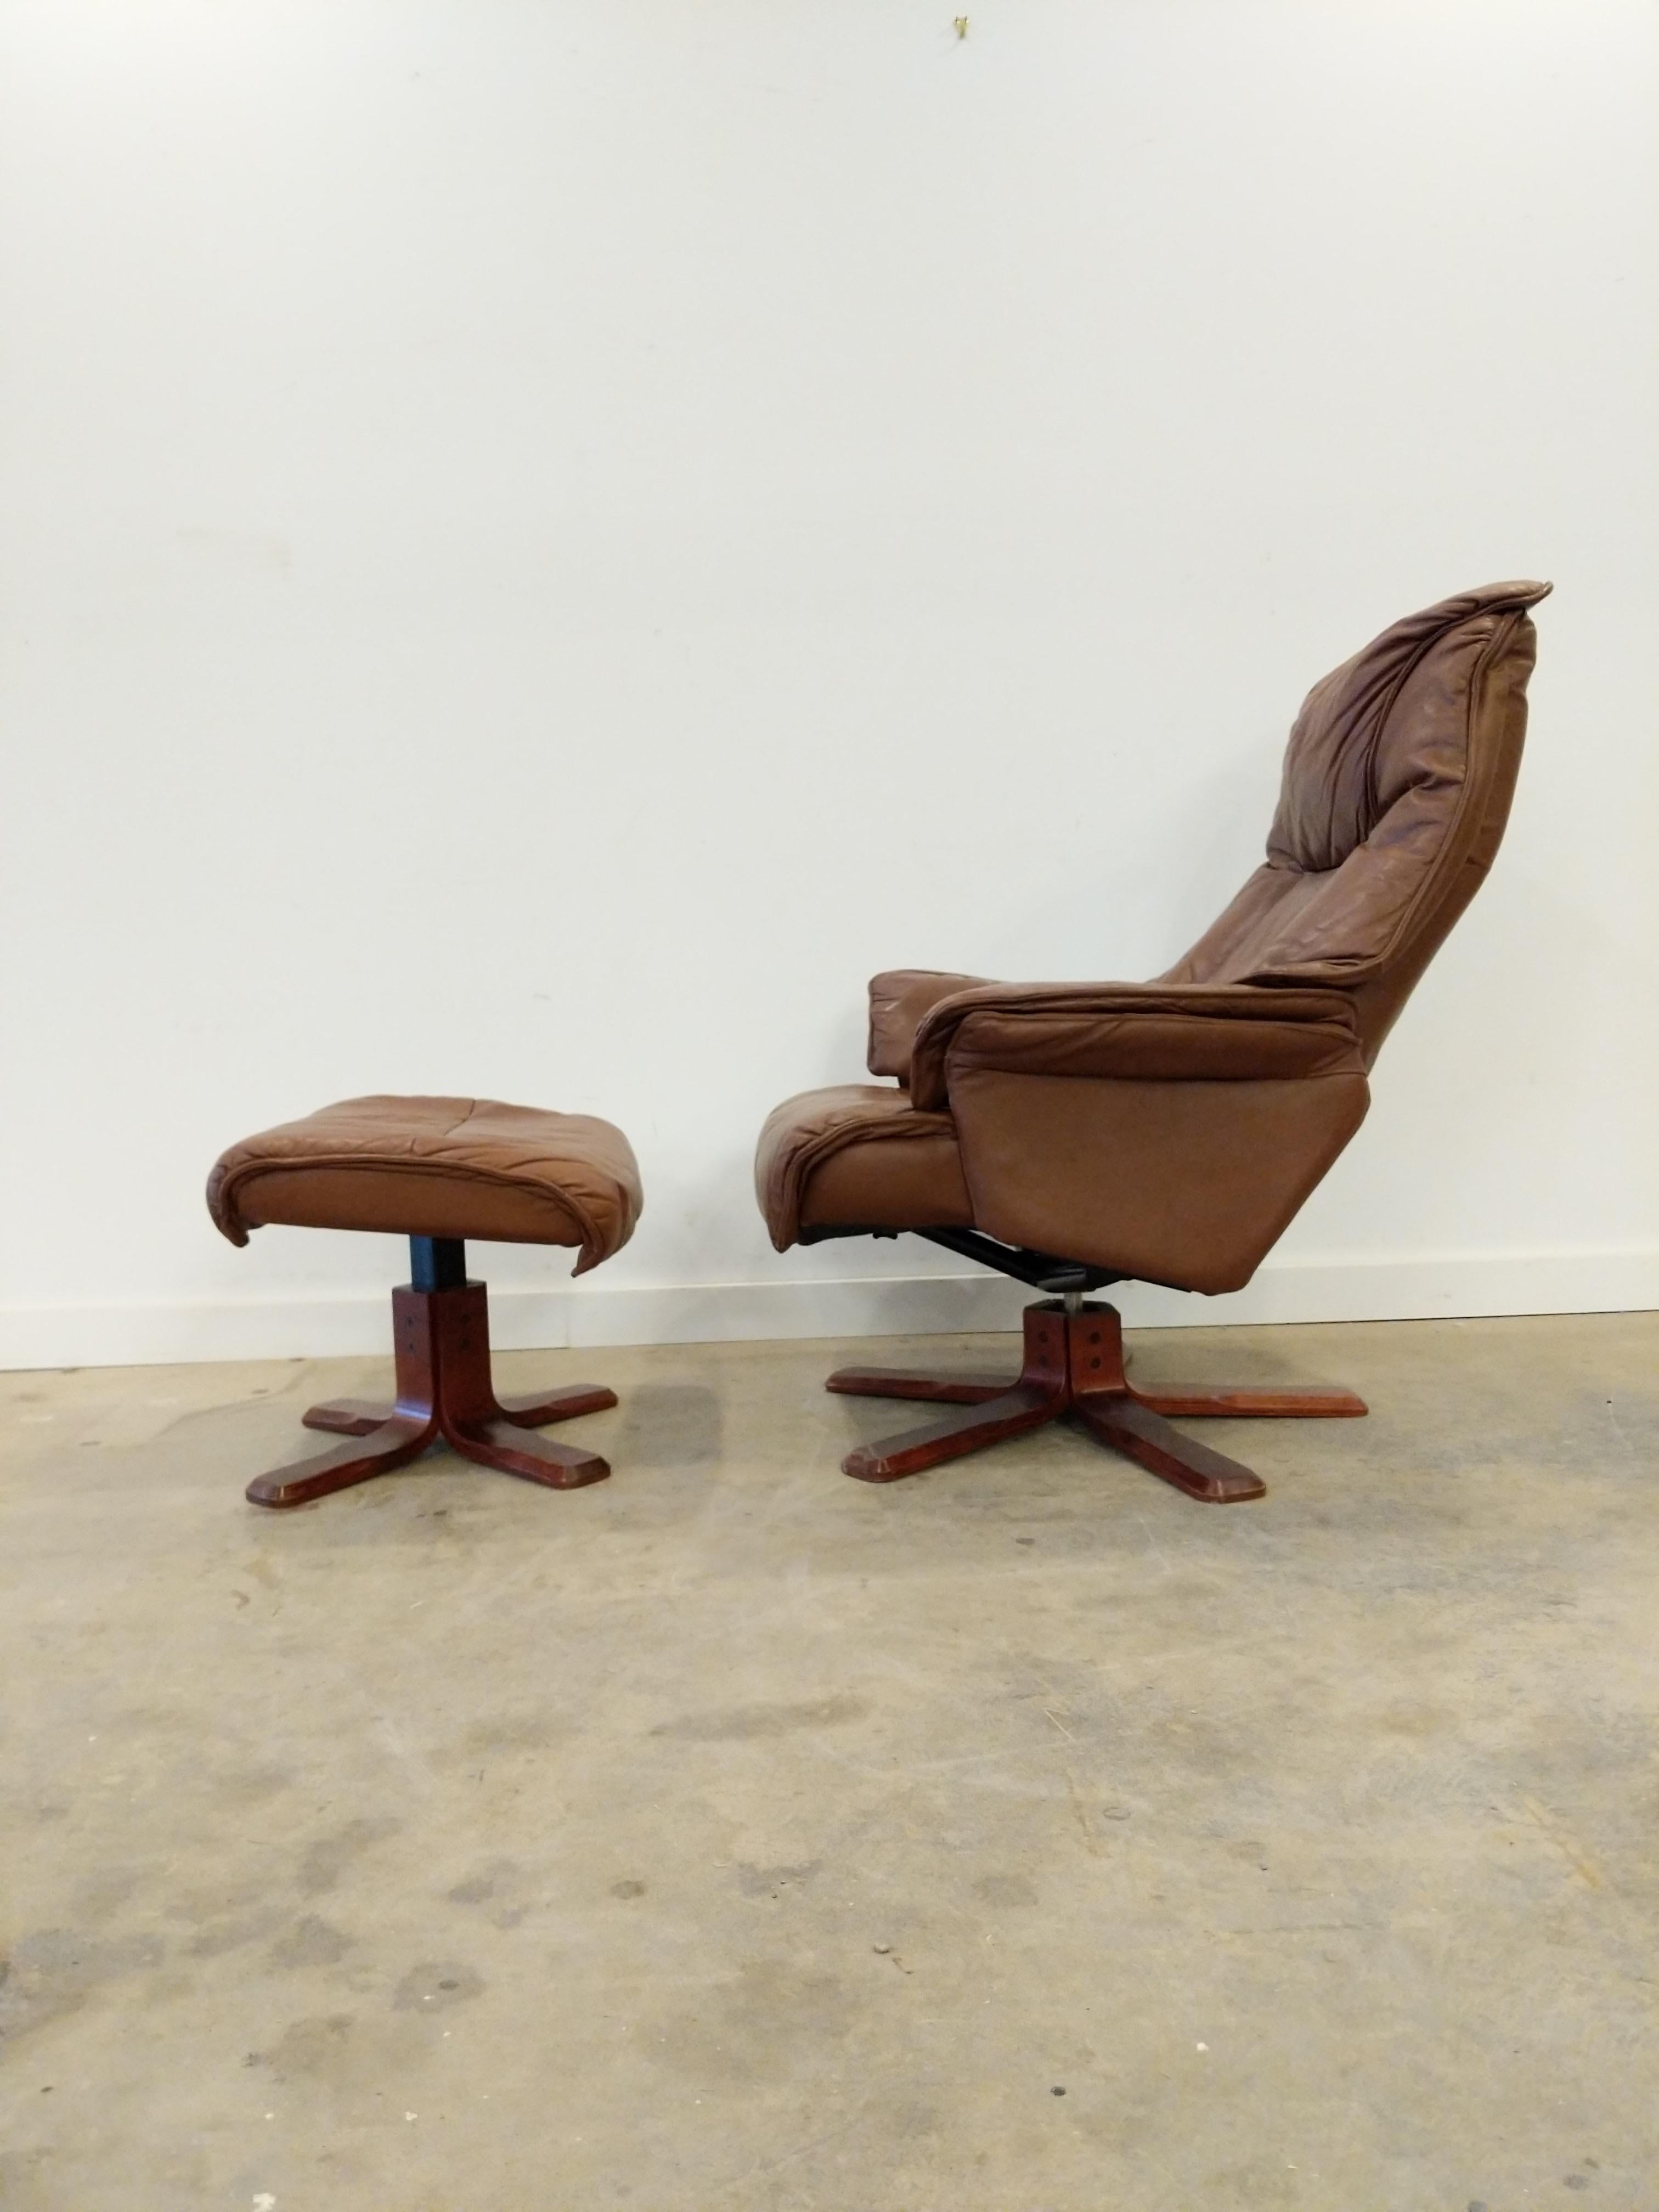 Authentic vintage mid century Danish / Scandinavian Modern leather lounge chair / recliner with footstool.

This set is in excellent vintage condition with very few signs of age-related wear (see photos).

If you would like any additional details,